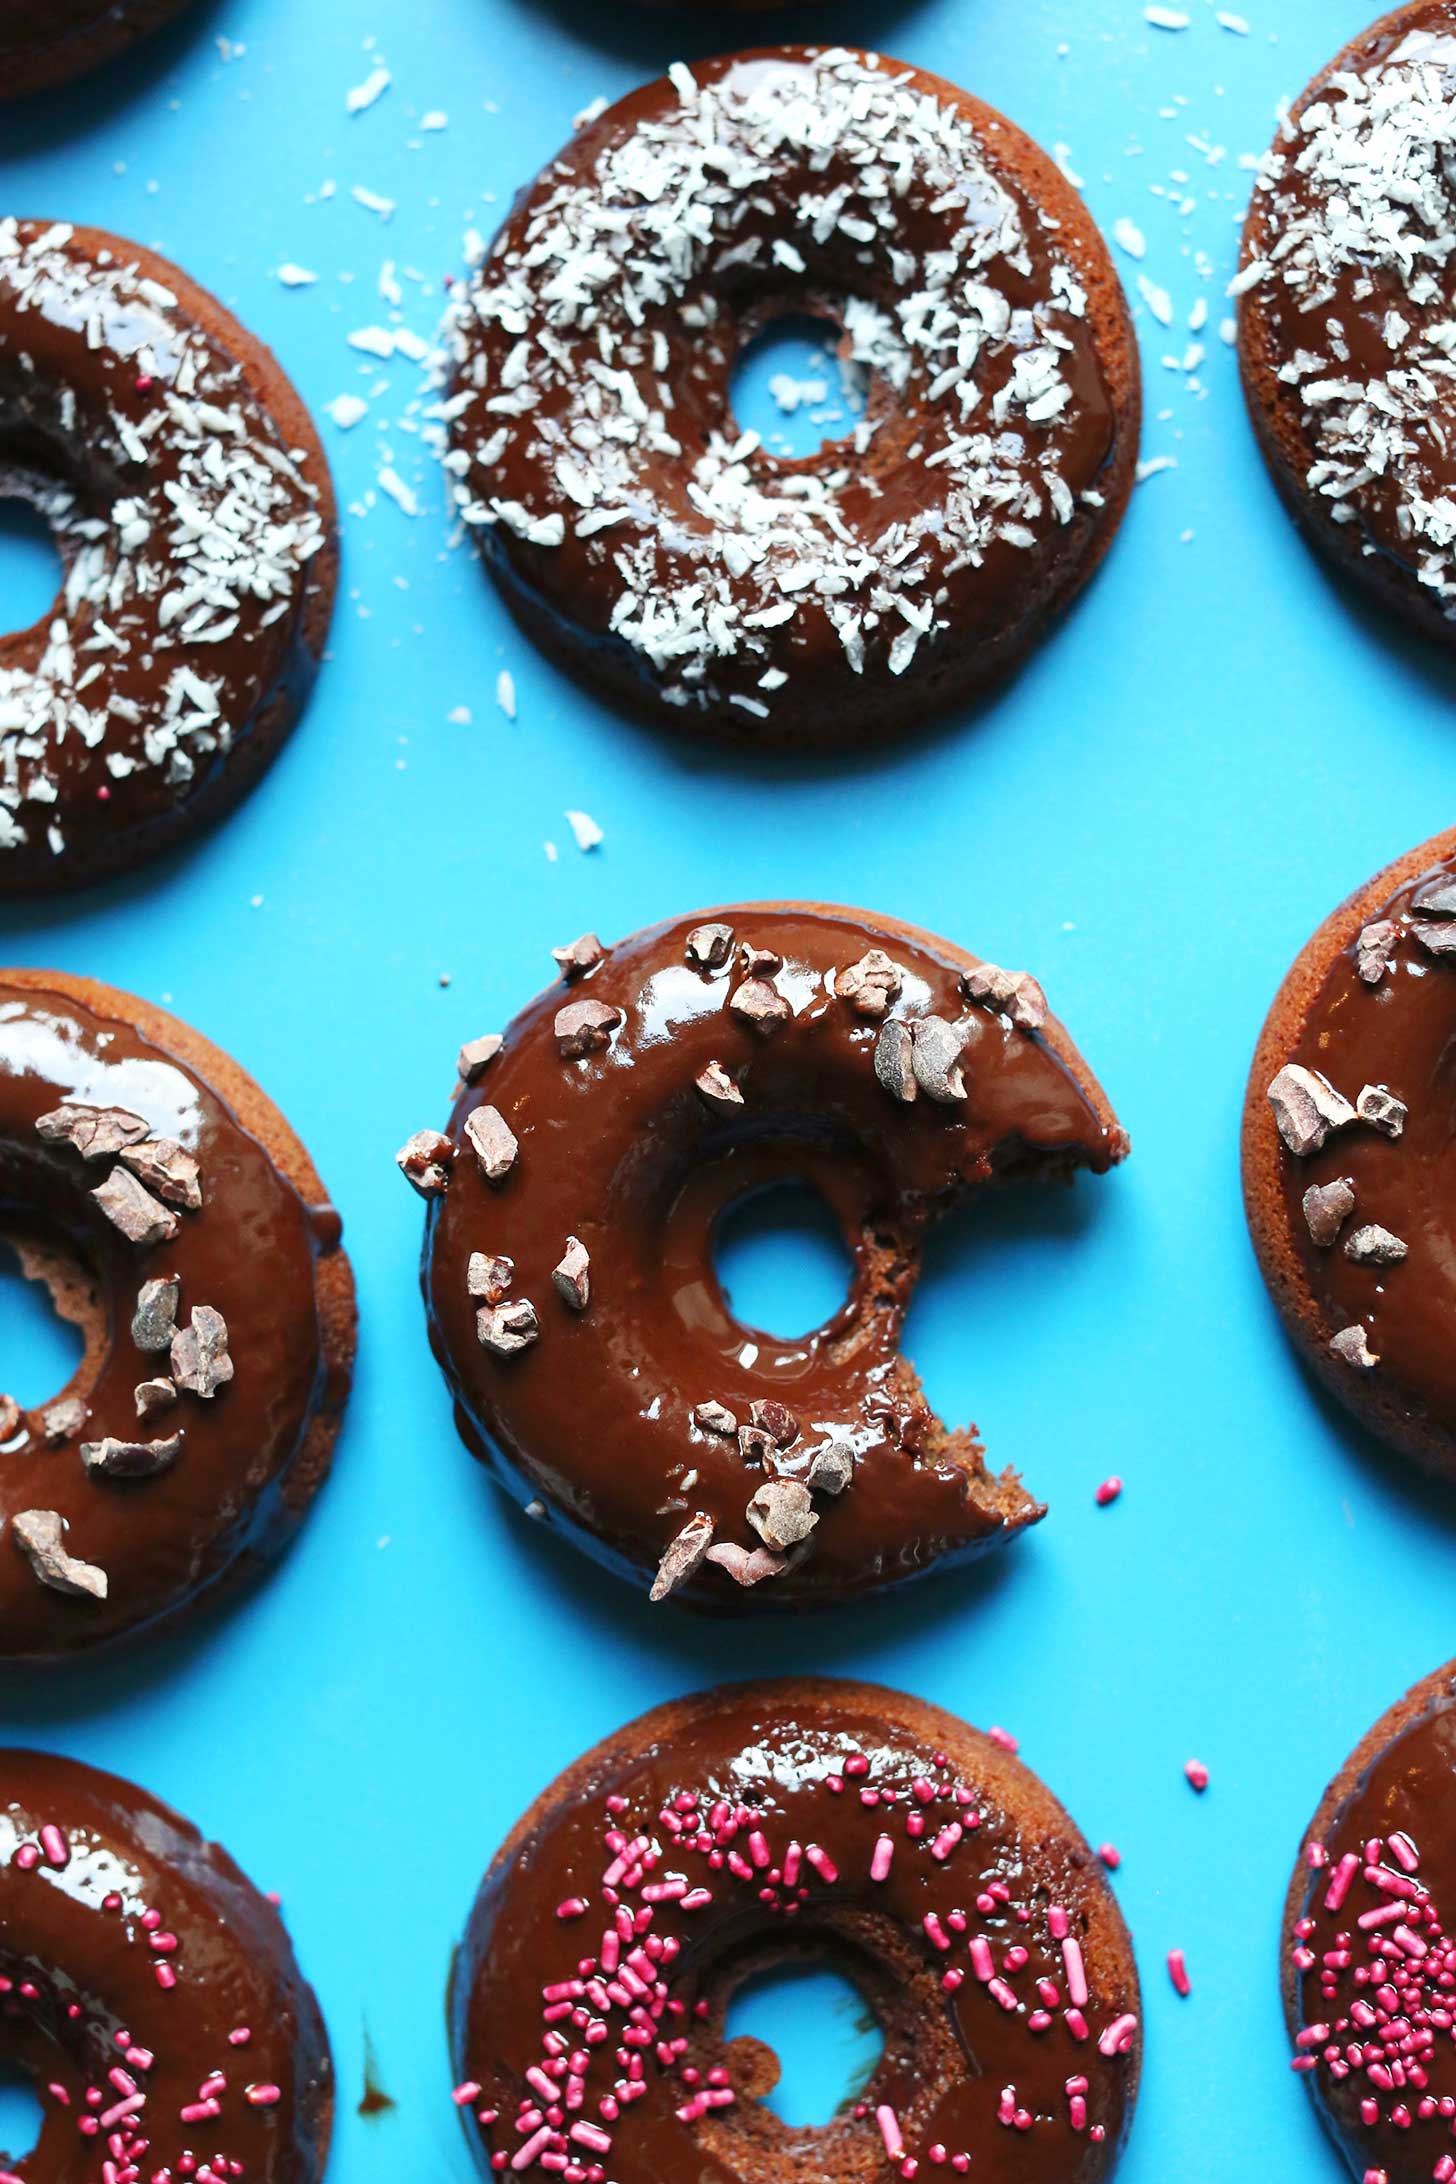 Easy Baked Chocolate Donuts with different toppings for a tasty gluten-free treat